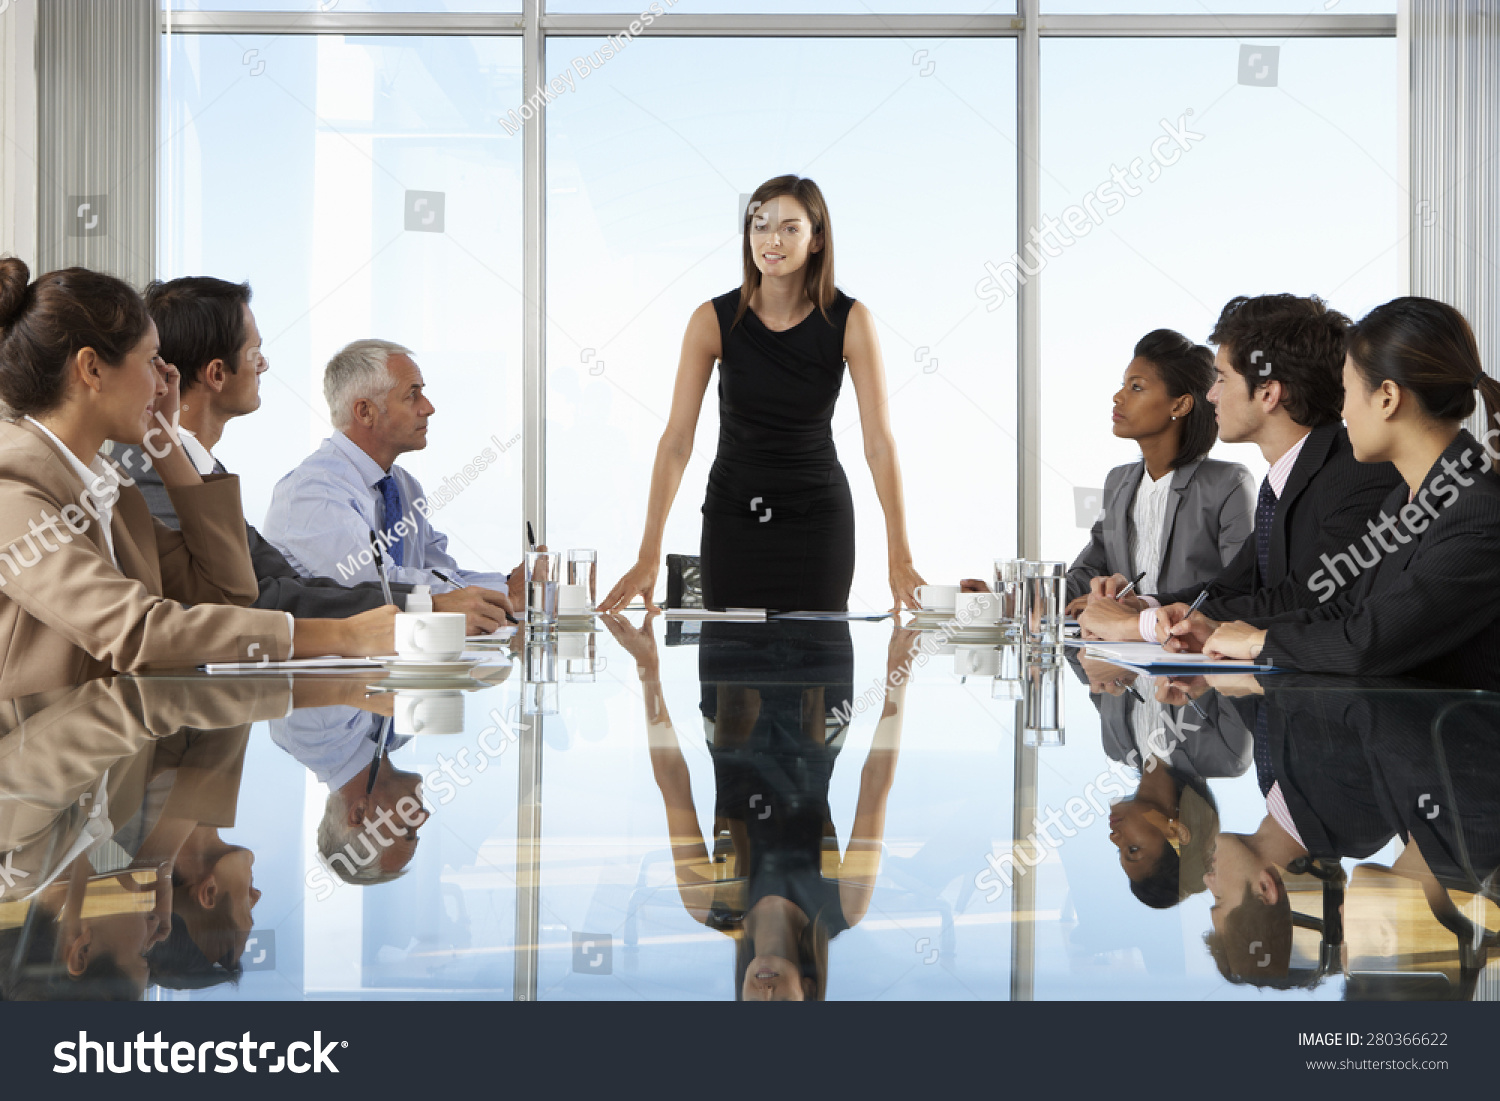 Group Of Business People Having Board Meeting Around Glass Table #280366622